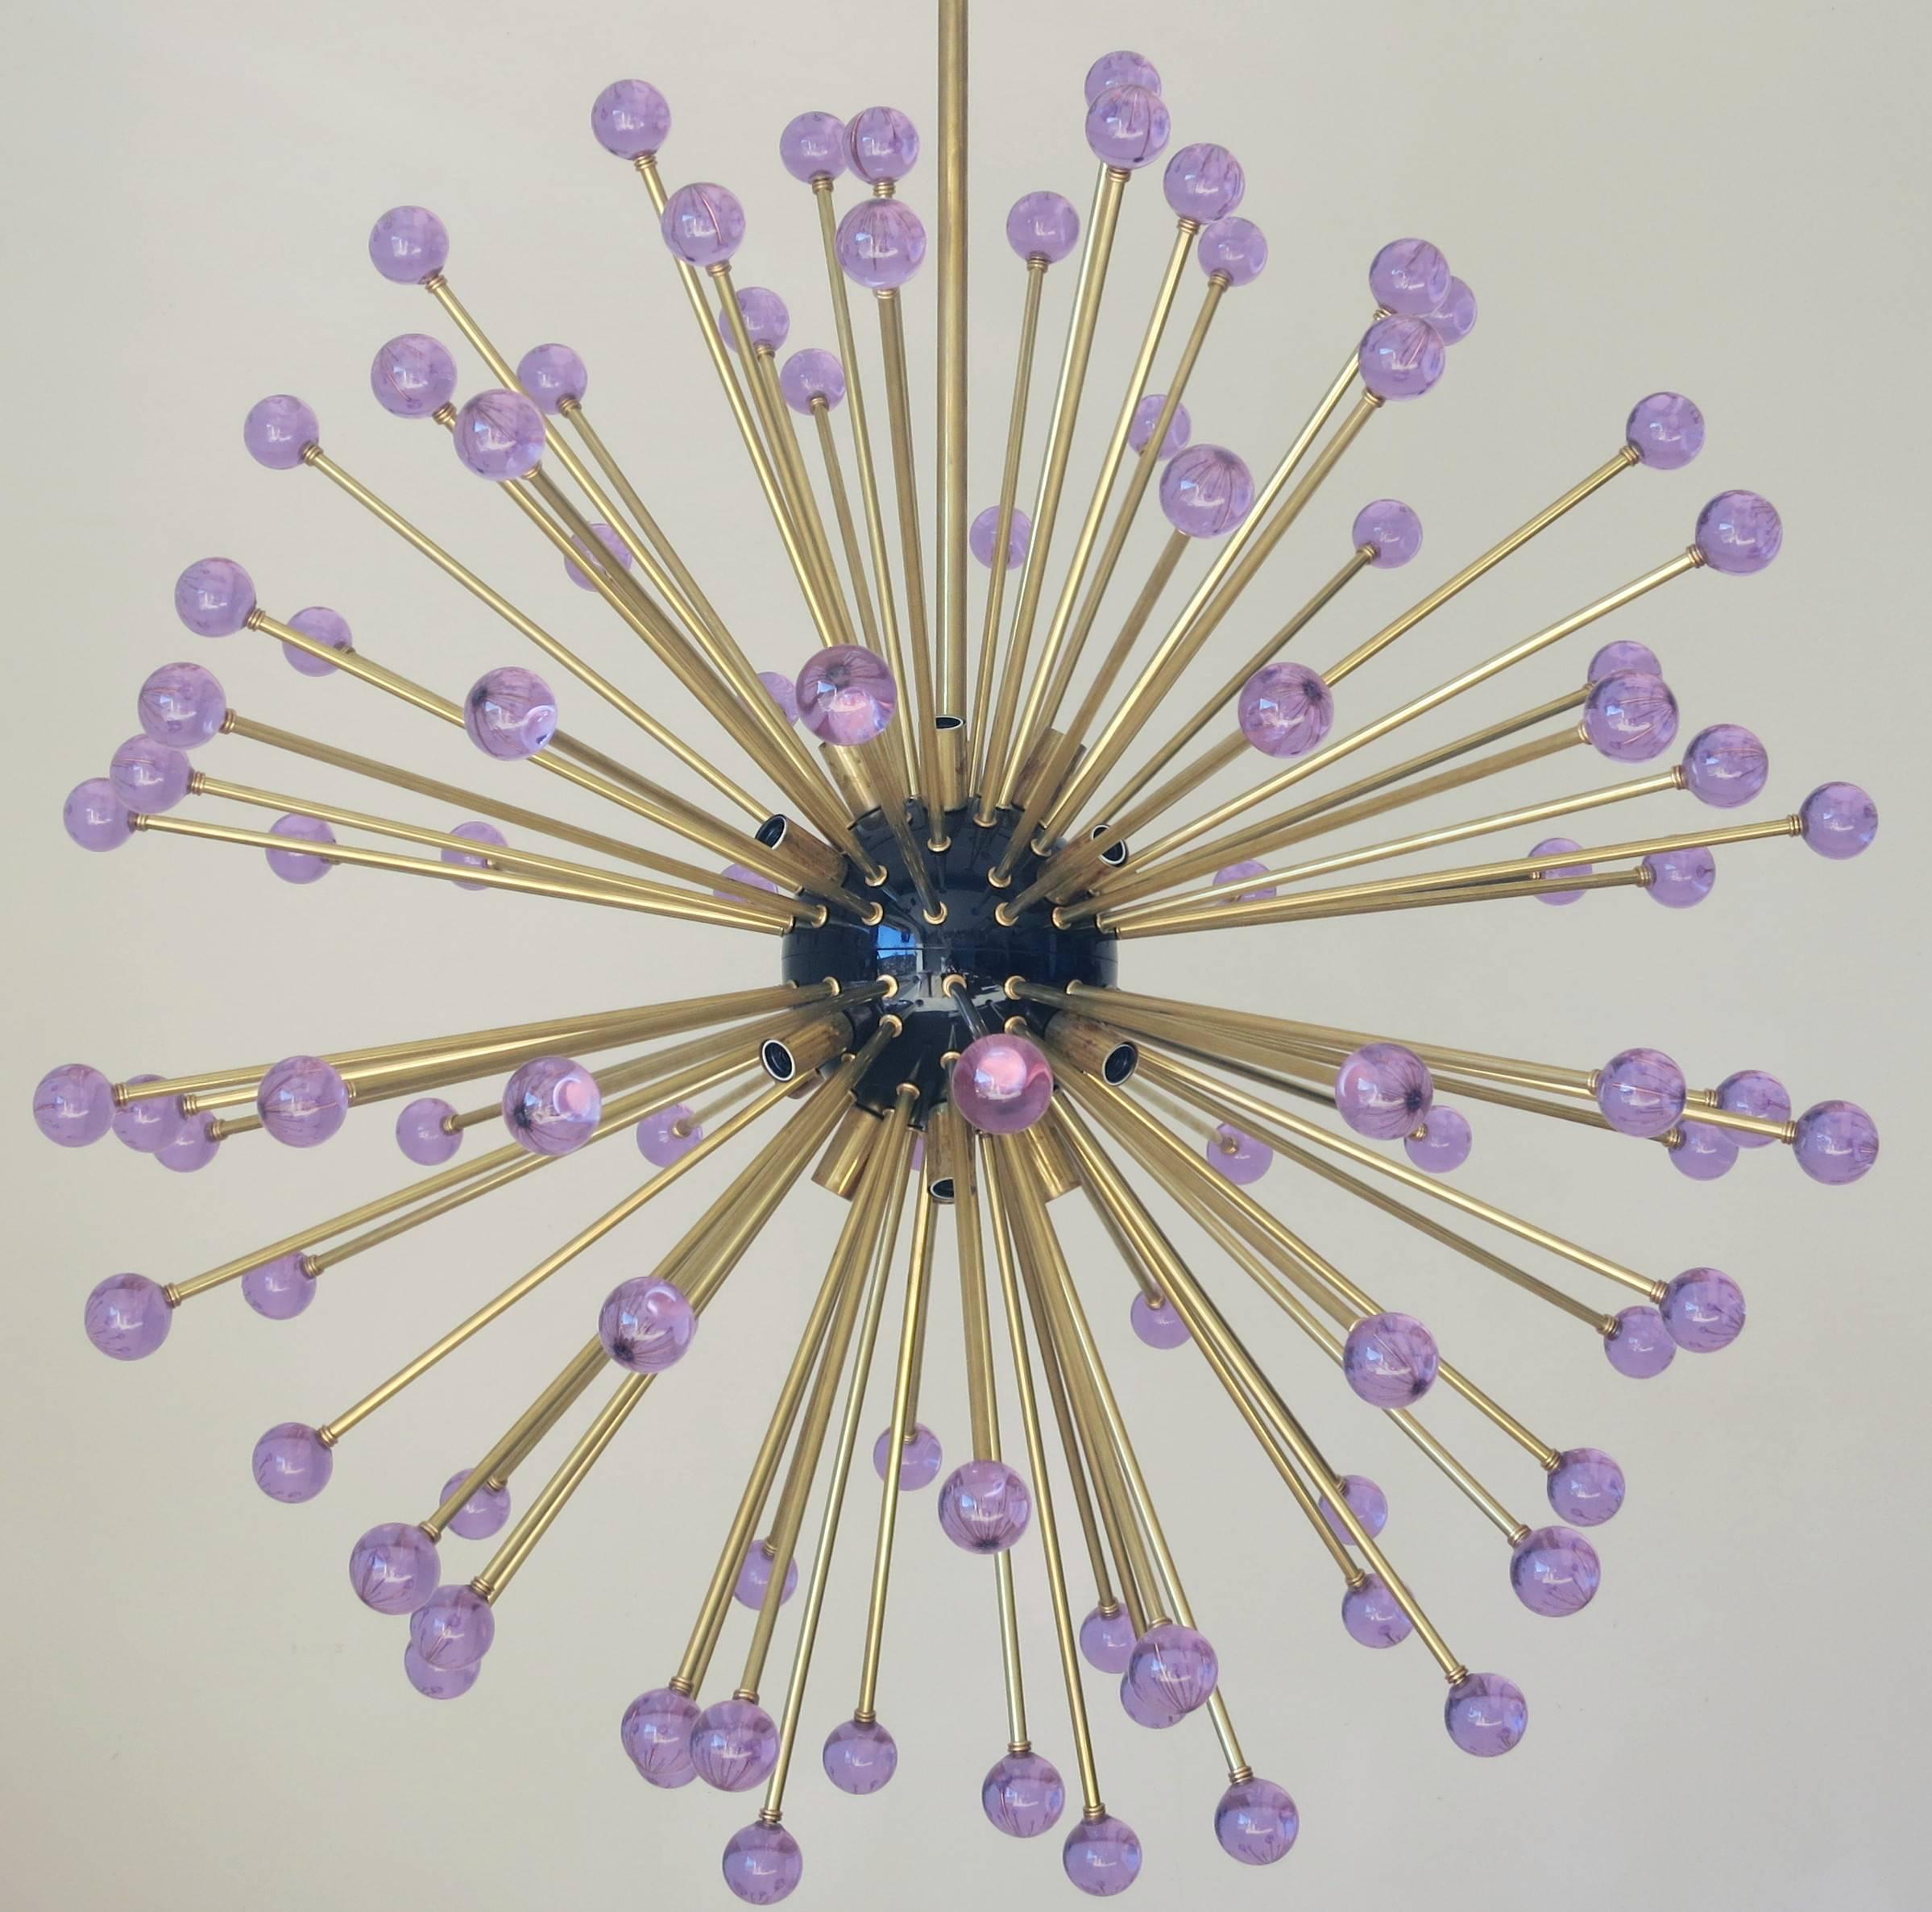 Modern Italian sputnik chandelier with purple Murano glass spheres, black enameled centre and canopy, mounted on brass frame / Designed by Fabio Bergomi for Fabio Ltd / Made in Italy
16 lights / E12 type / max 40W each
Diameter: 47.25 inches /